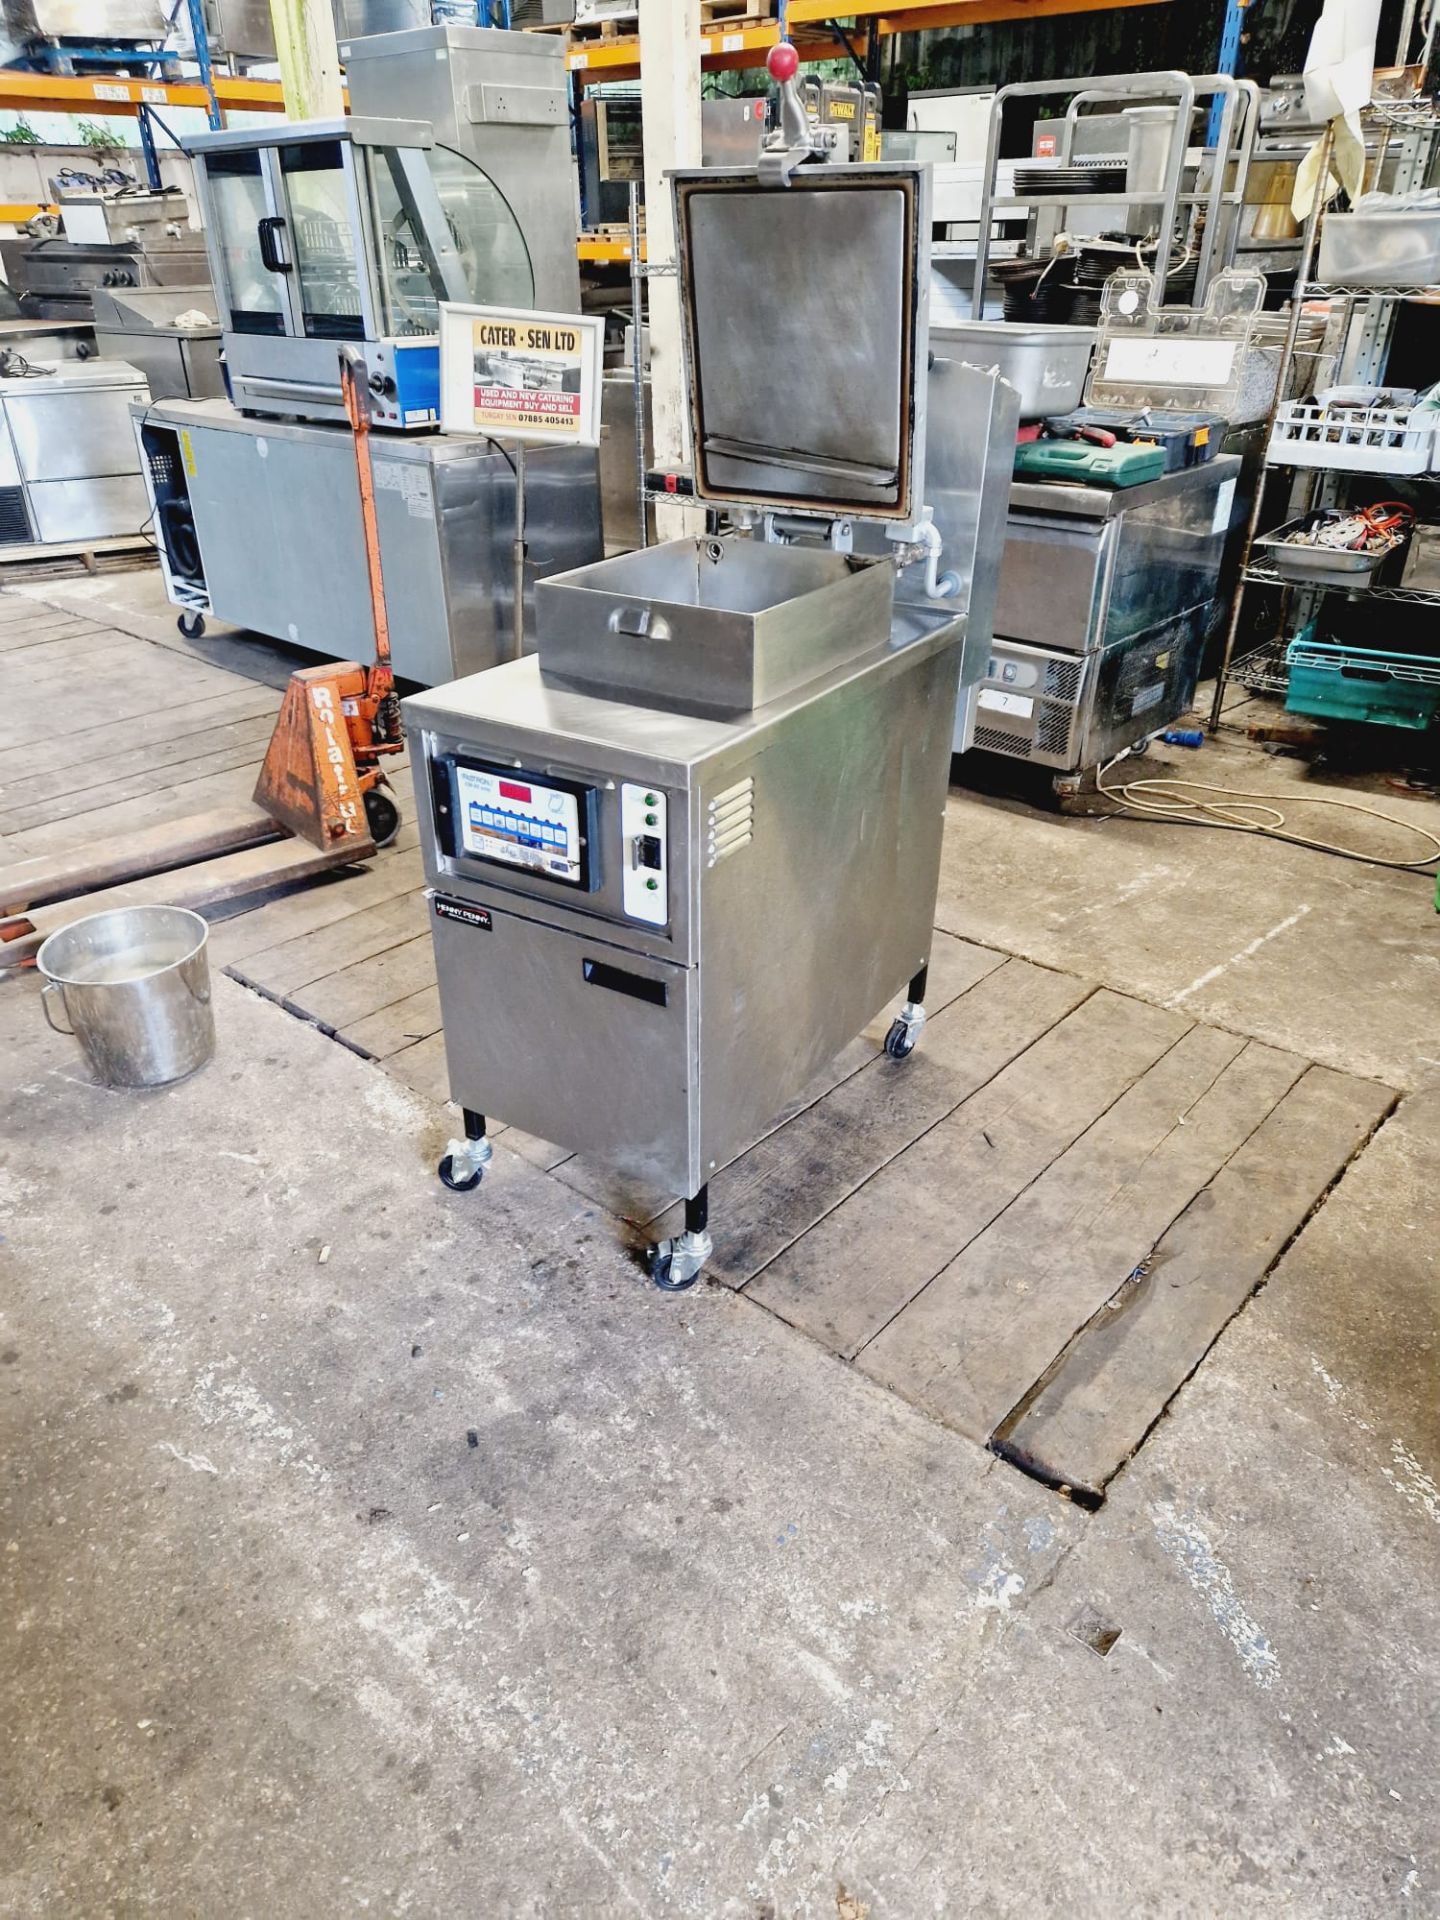 HENNY PENNY FASTRON PRESSURE FRYER - FRIED CHICKEN MACHINE - FULLY REFURBISHED AND FULLY WORKING. - Image 2 of 3